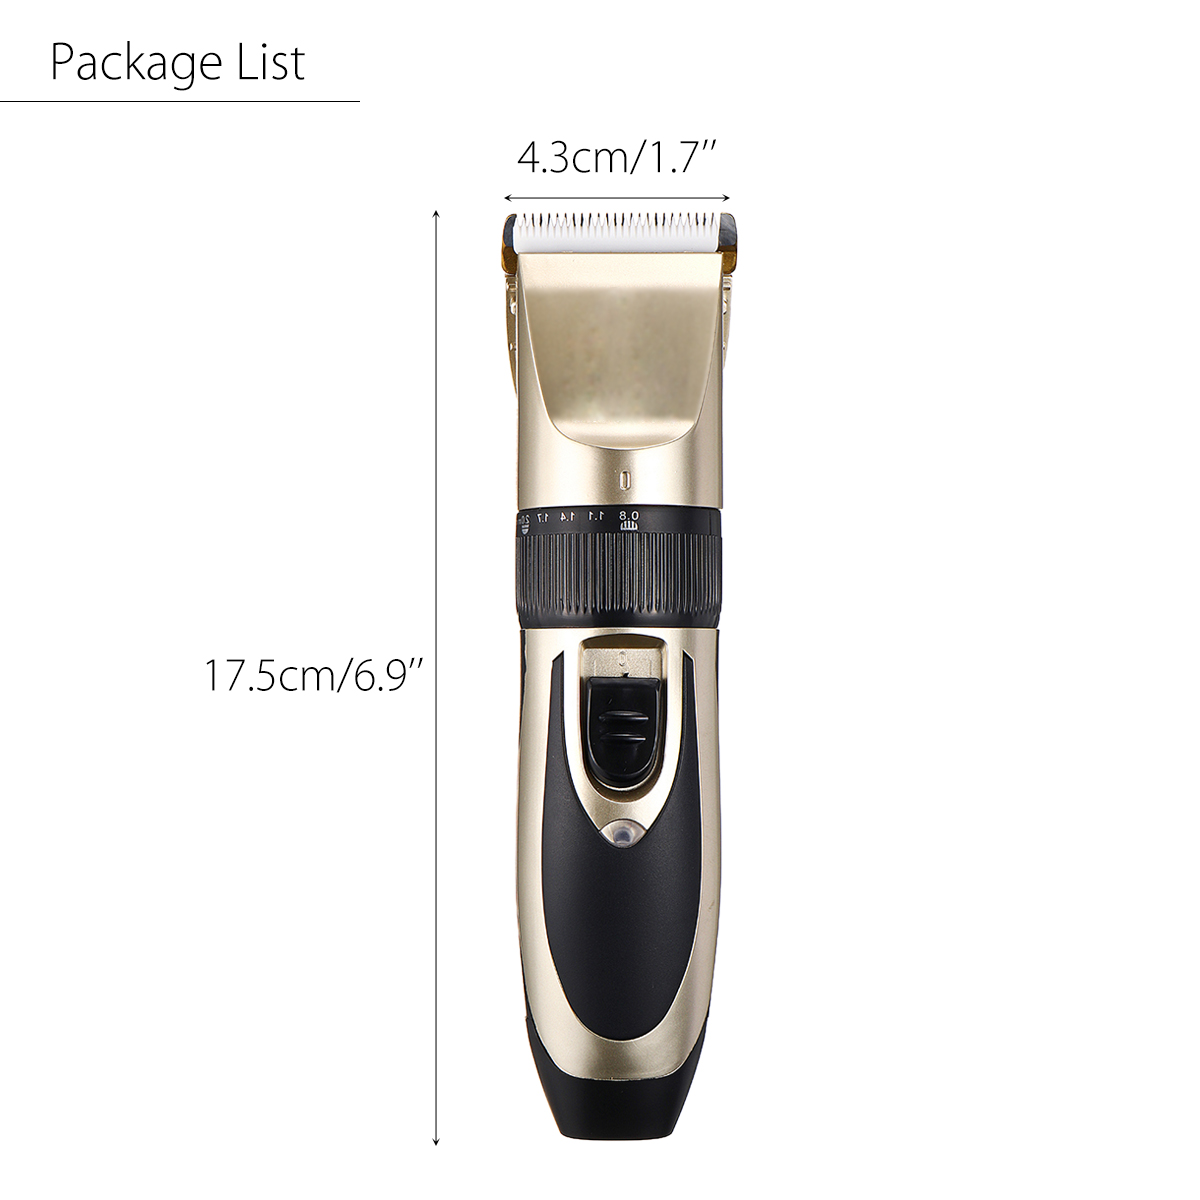 USA-DIRECT-USB-Rechargeable-Pet-Hair-Clipper-Cat-Dog-Trimmer-Kit-Pet-Grooming-Scissor-Portable-Pet-A-1423805-2